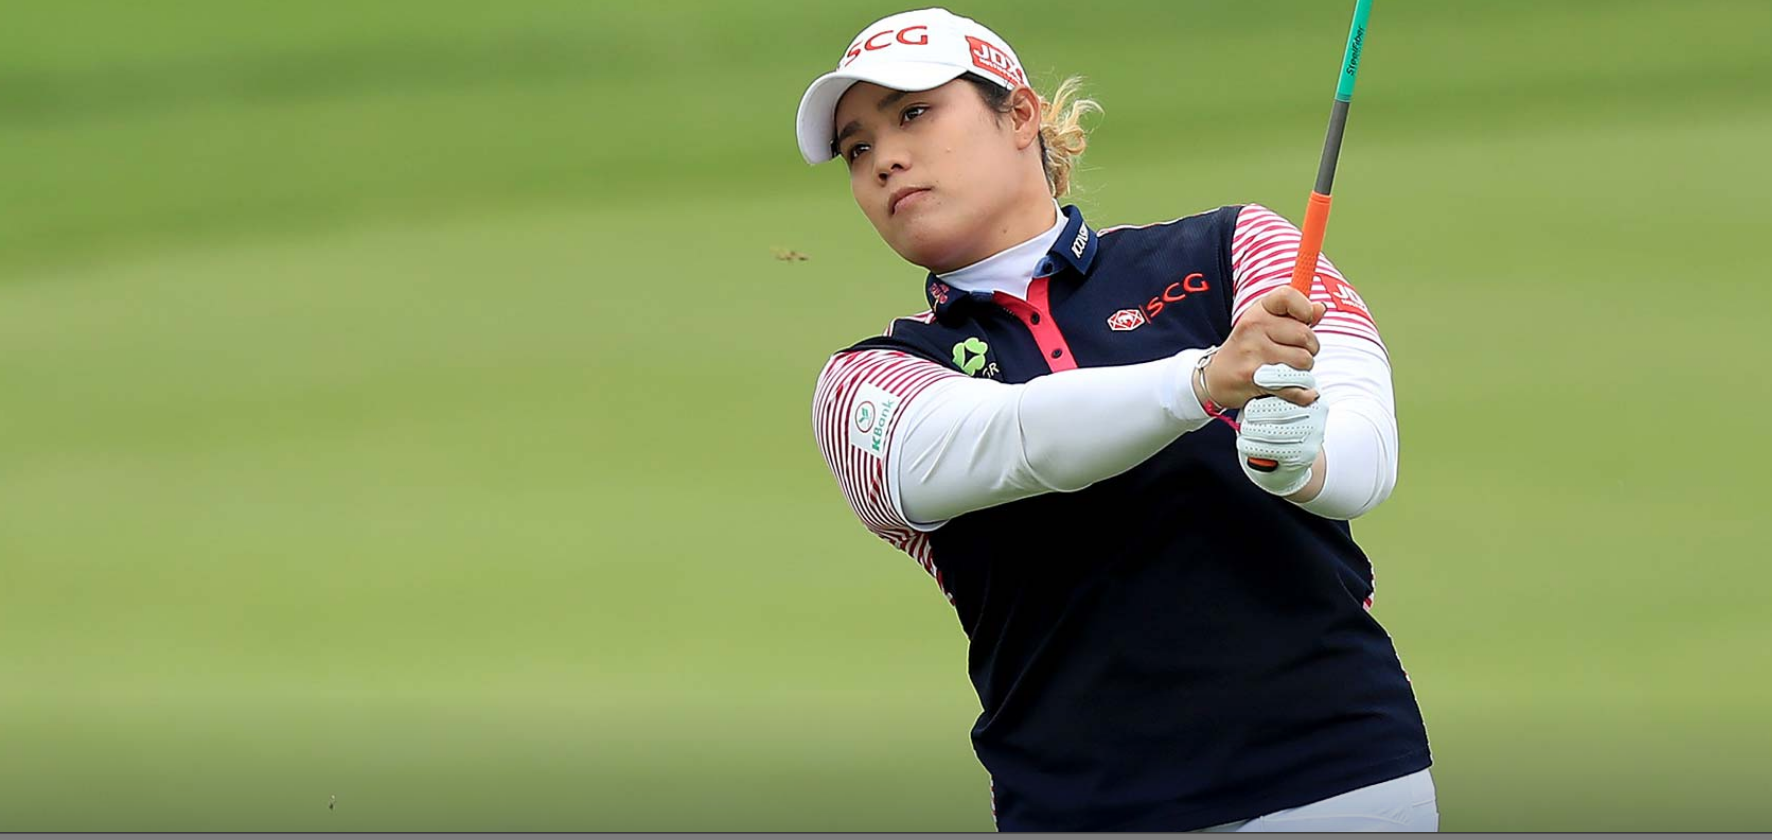 6 things to know after the second round of the KPMG Women's PGA Championship